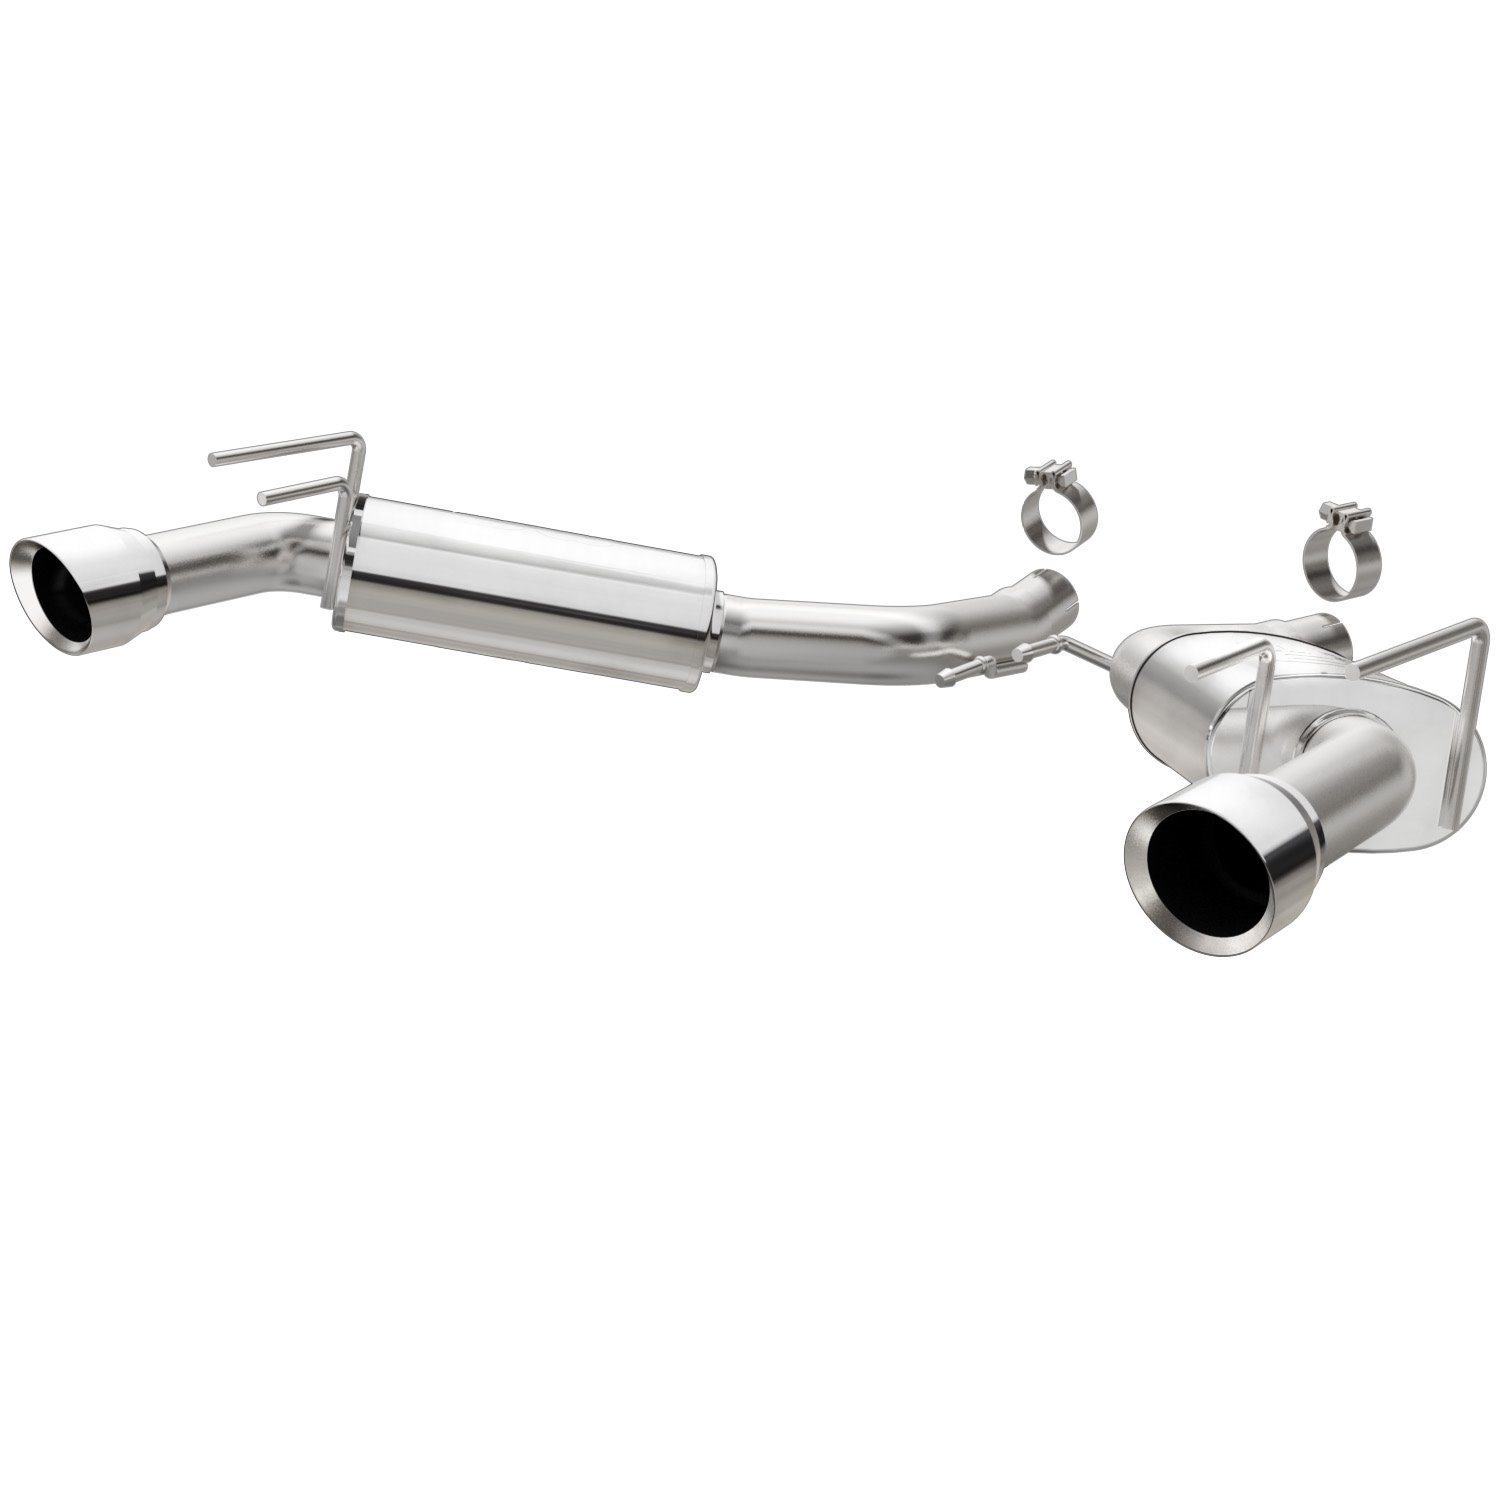 Axle-Back Exhaust System 2014-2015 Camaro V8 6.2L